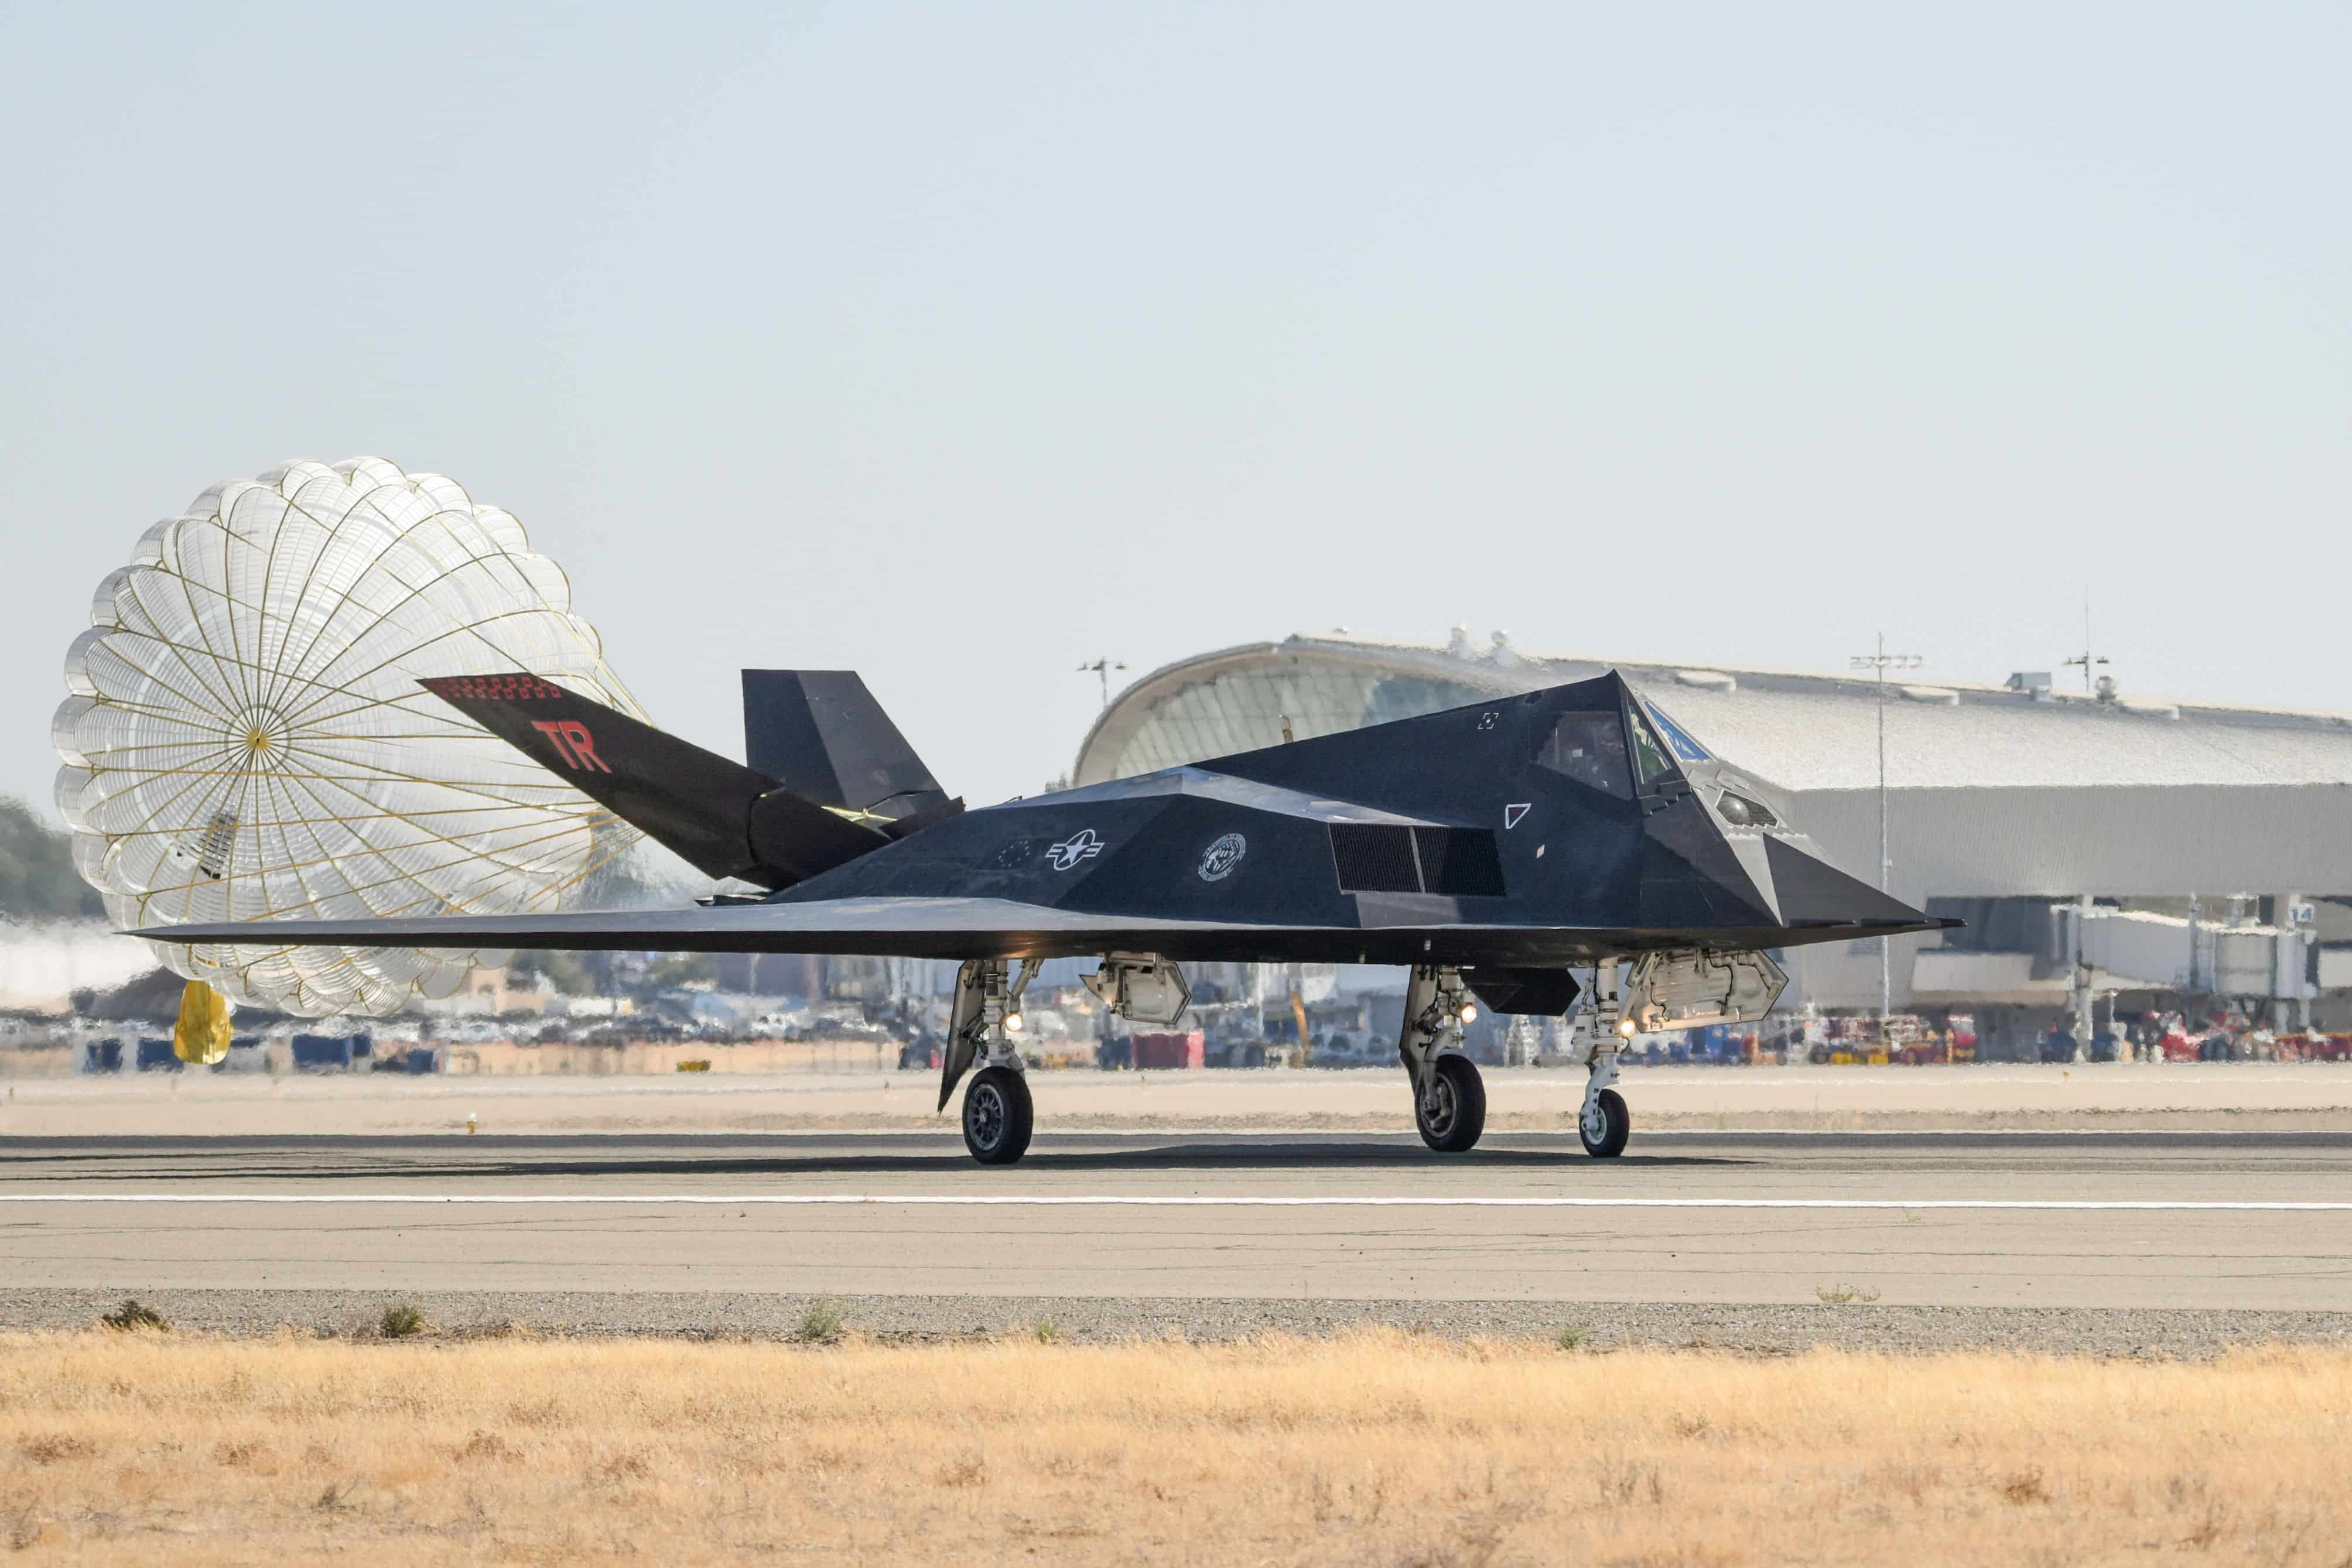 An F-117 Nighthawk lands for the first time at the Fresno Yosemite International Airport, Sept 13, 2021, to conduct training missions with the local Air National Guard unit. Two F-117 Nighthawks are participating in dissimilar air combat training missions this week along with F-15 pilots from the 144th Fighter Wing in Fresno, Calif. (Air National Guard photo by Capt. Jason Sanchez)